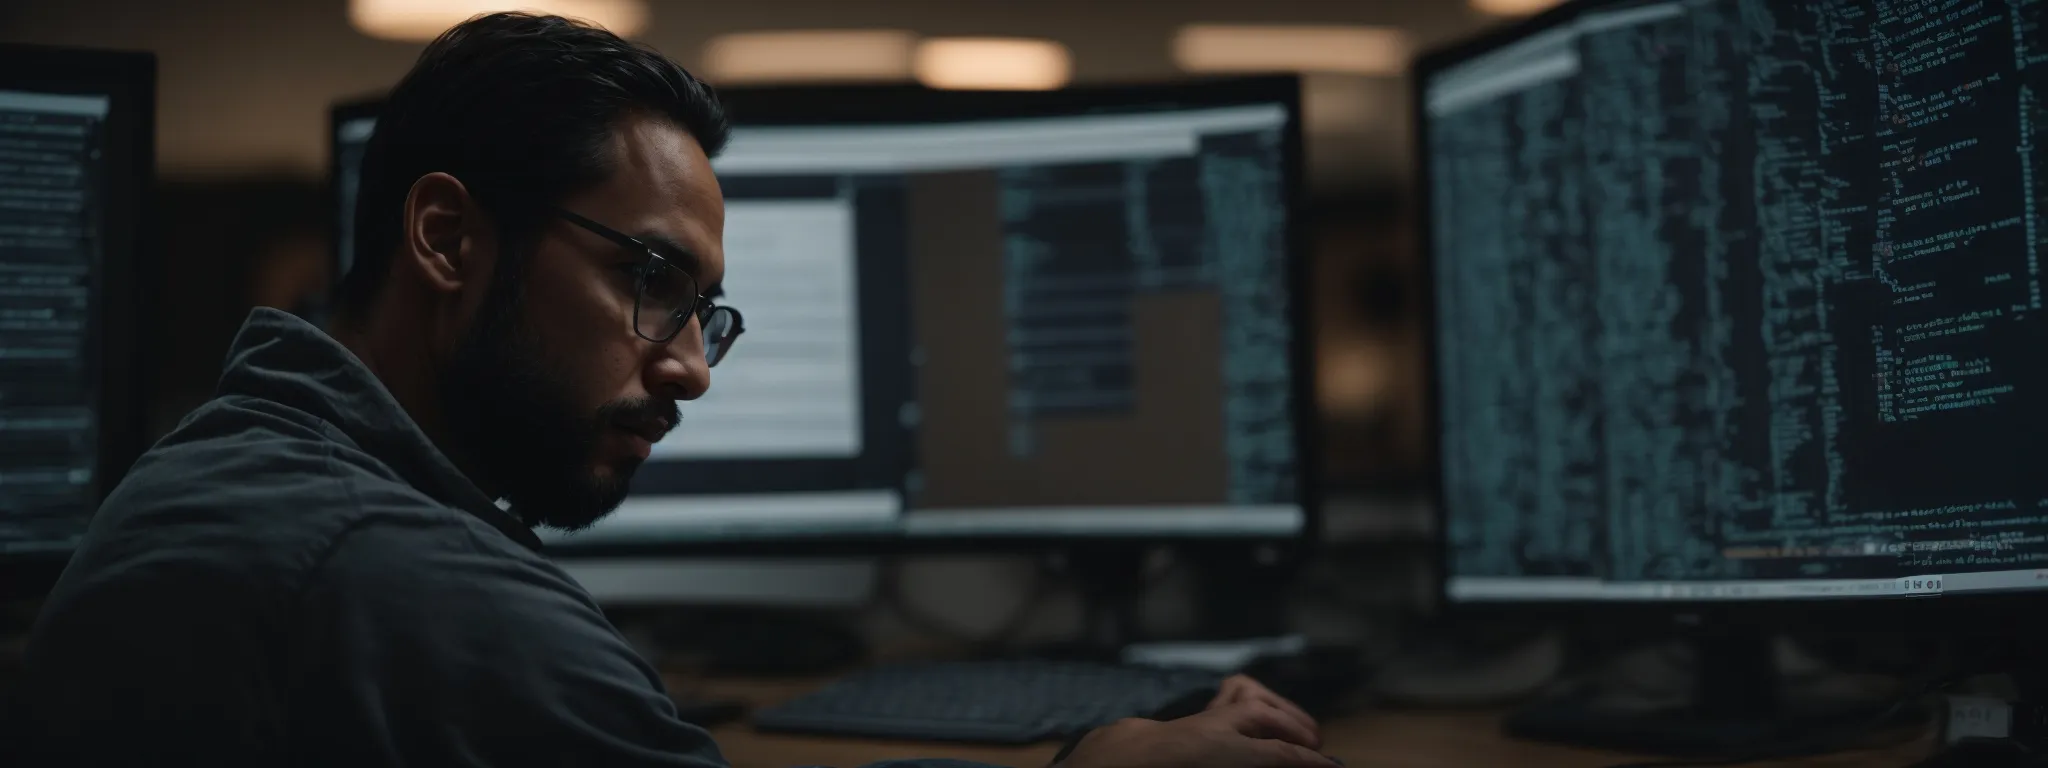 a web developer gazes thoughtfully at a code-laden computer screen, contemplating the broader spectrum of seo tactics beyond mere meta tags.